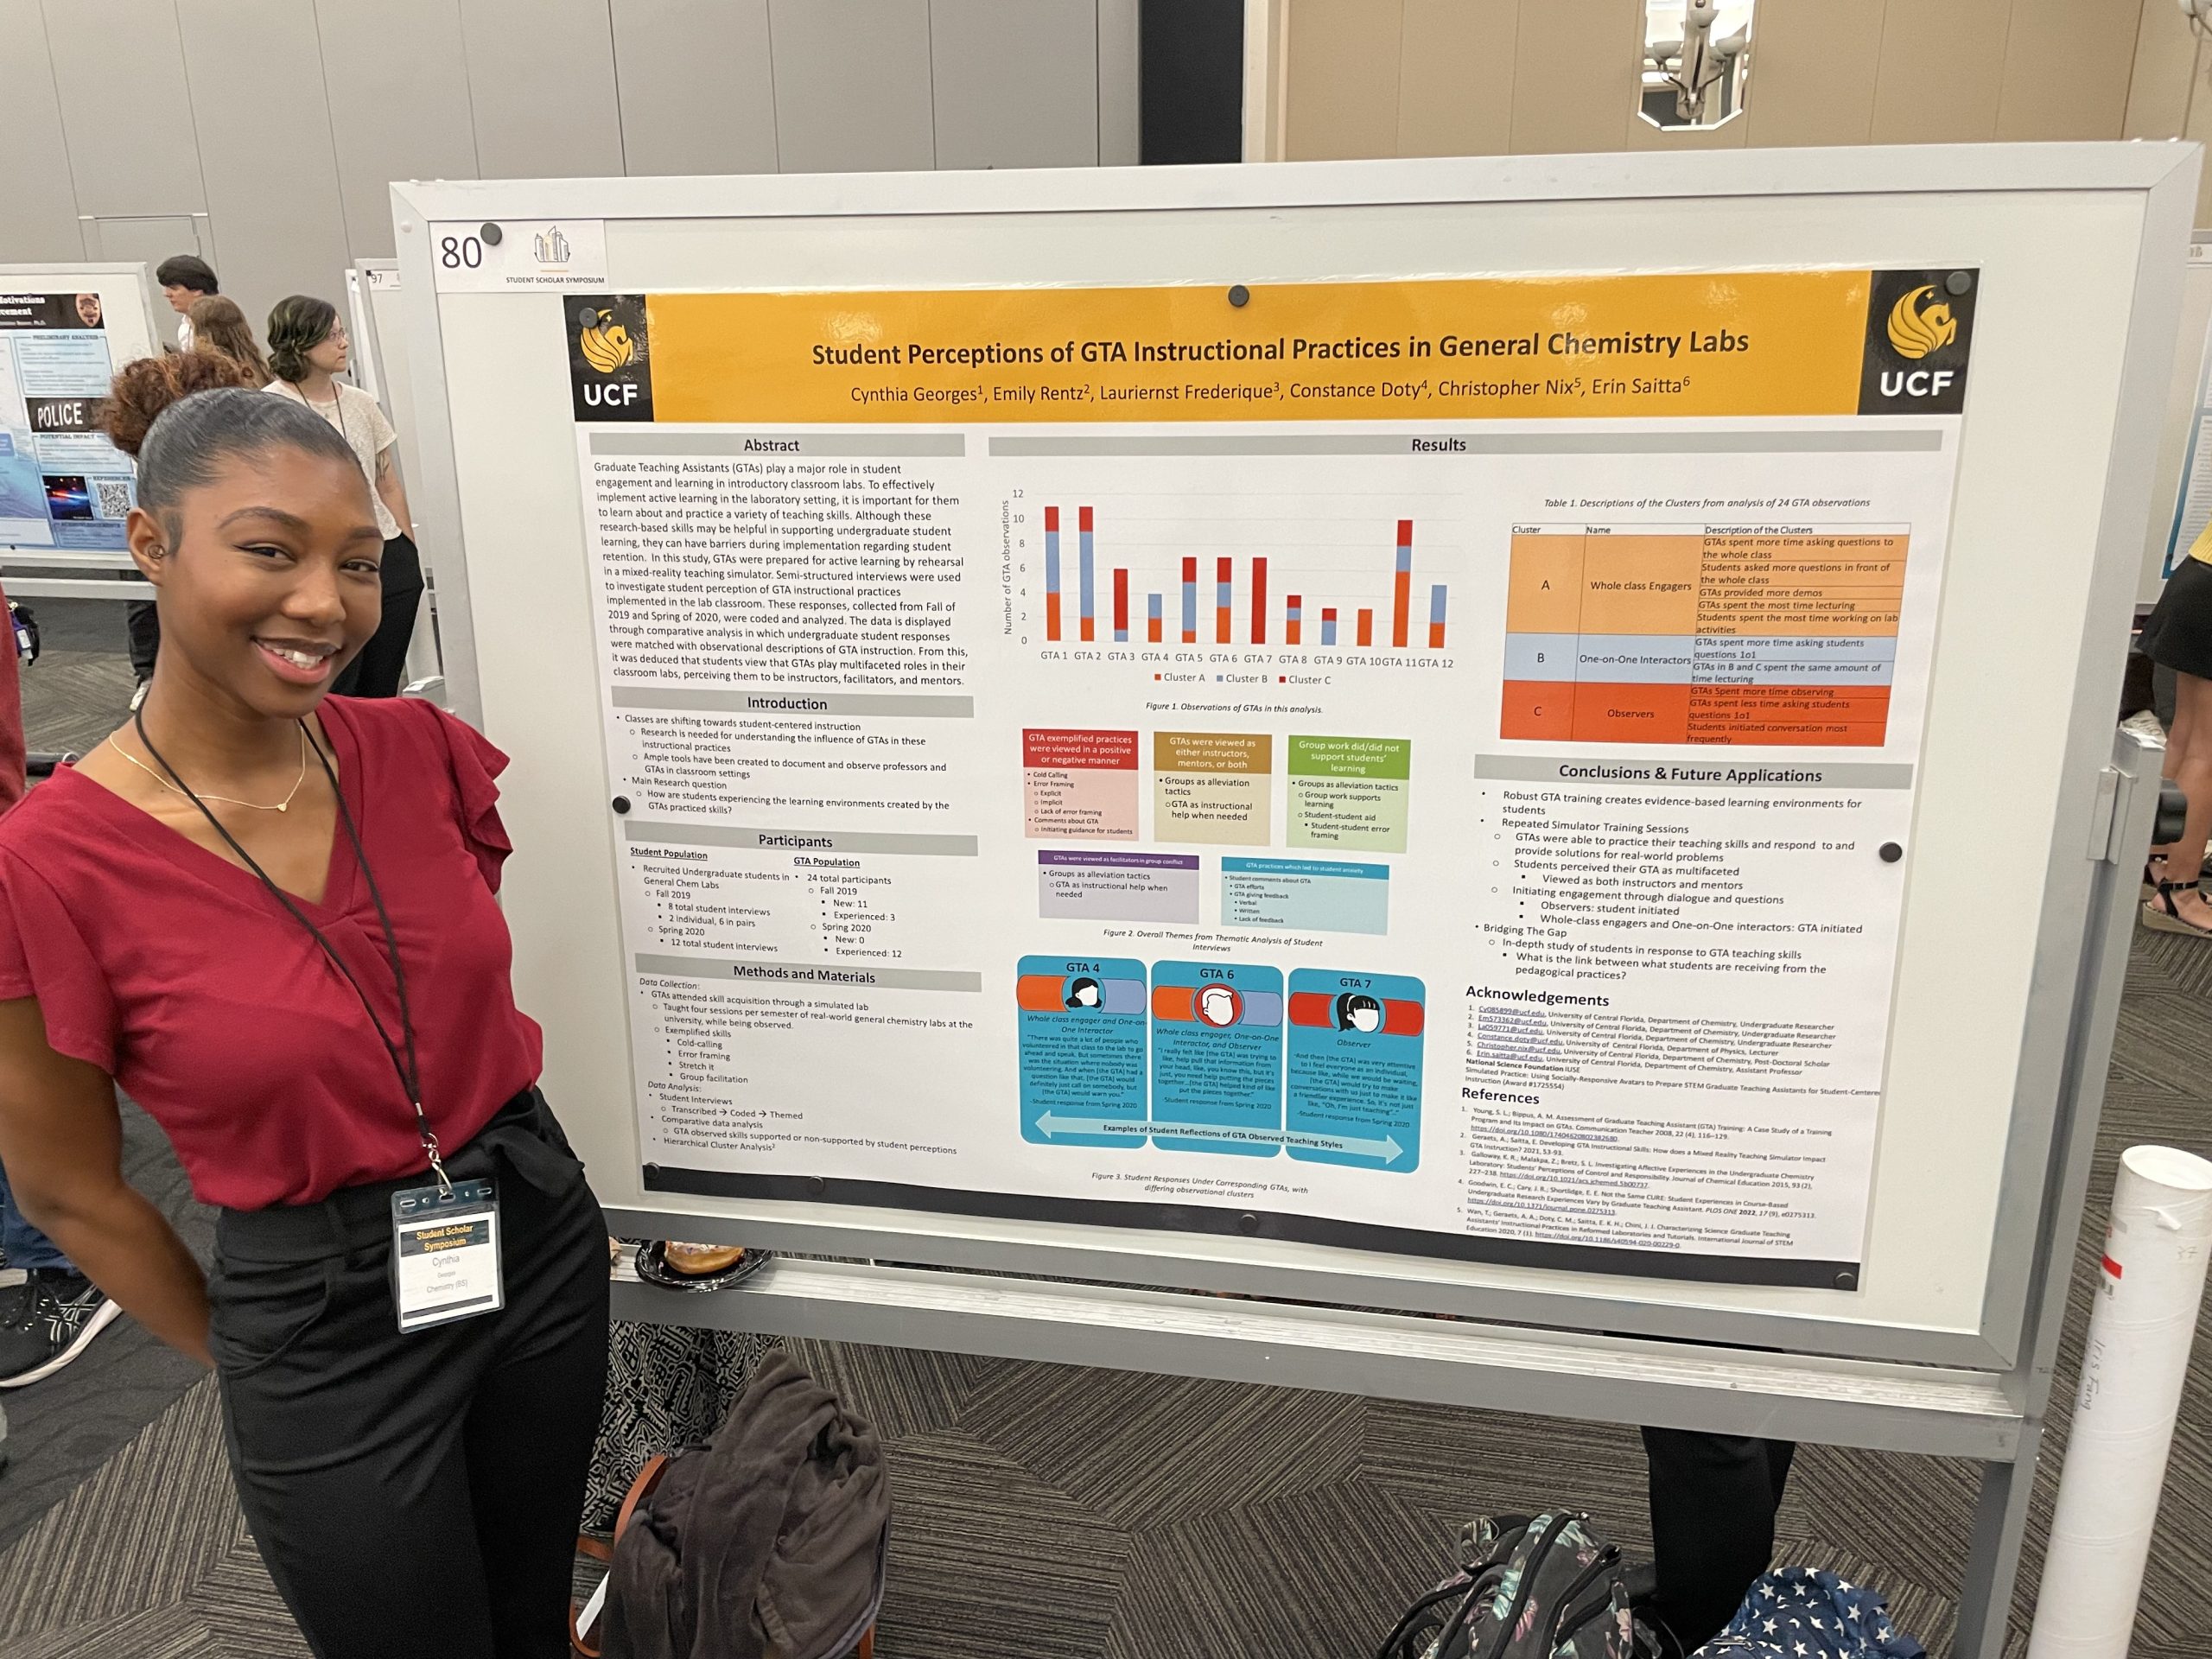 Cynthia presenting a research poster about student perceptions of UCF chemistry education and GTA instructional practices in general chemistry labs.